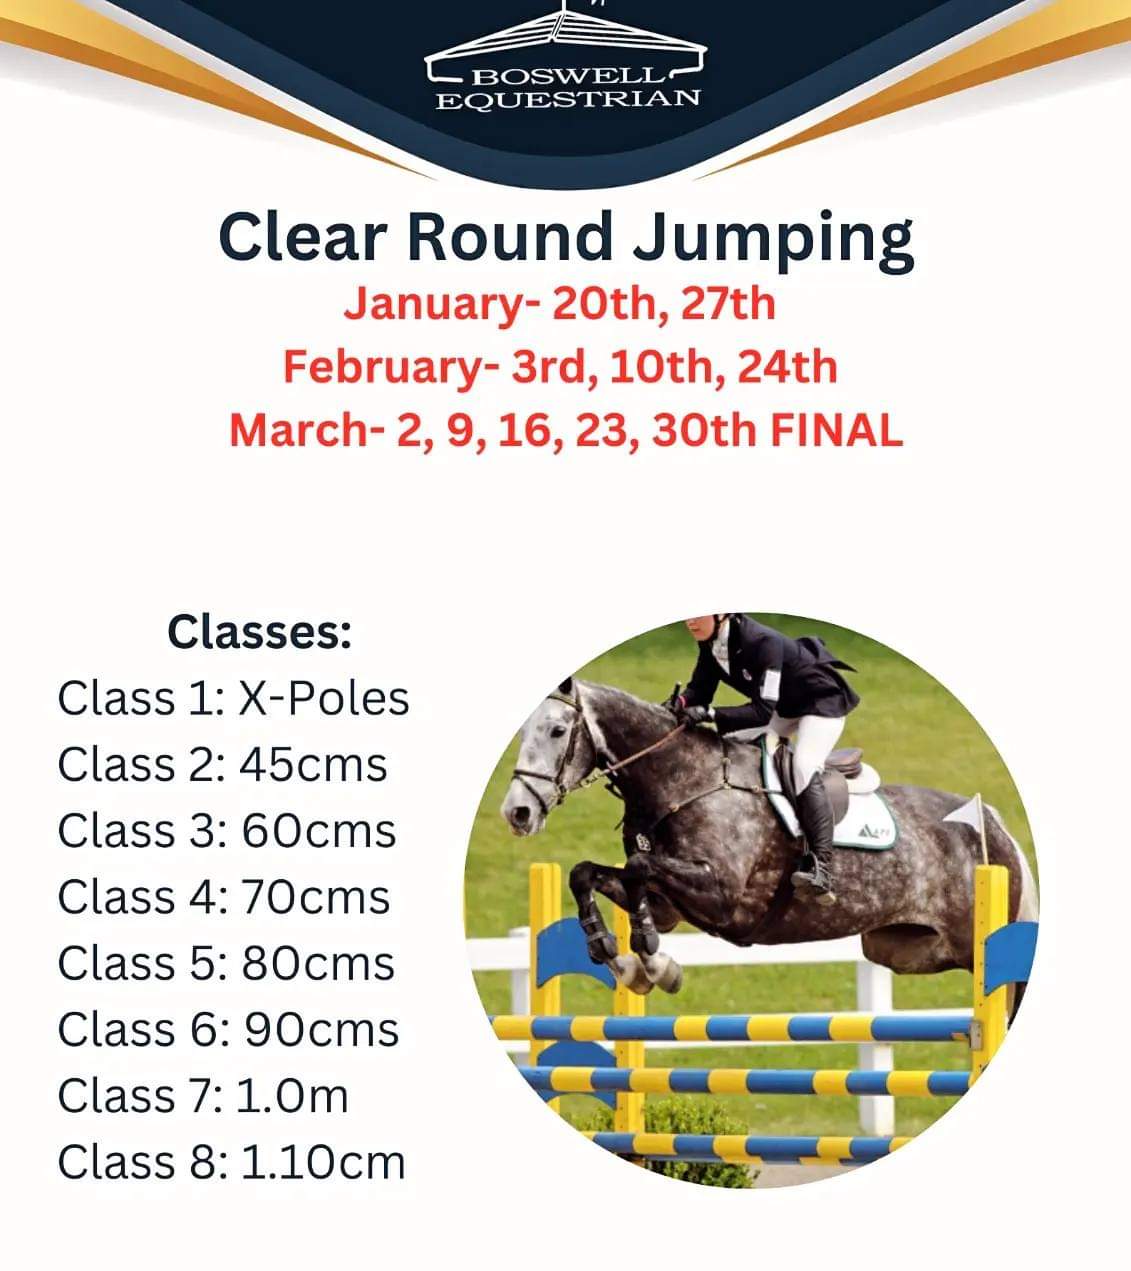 Clear Round Jumping at Boswell